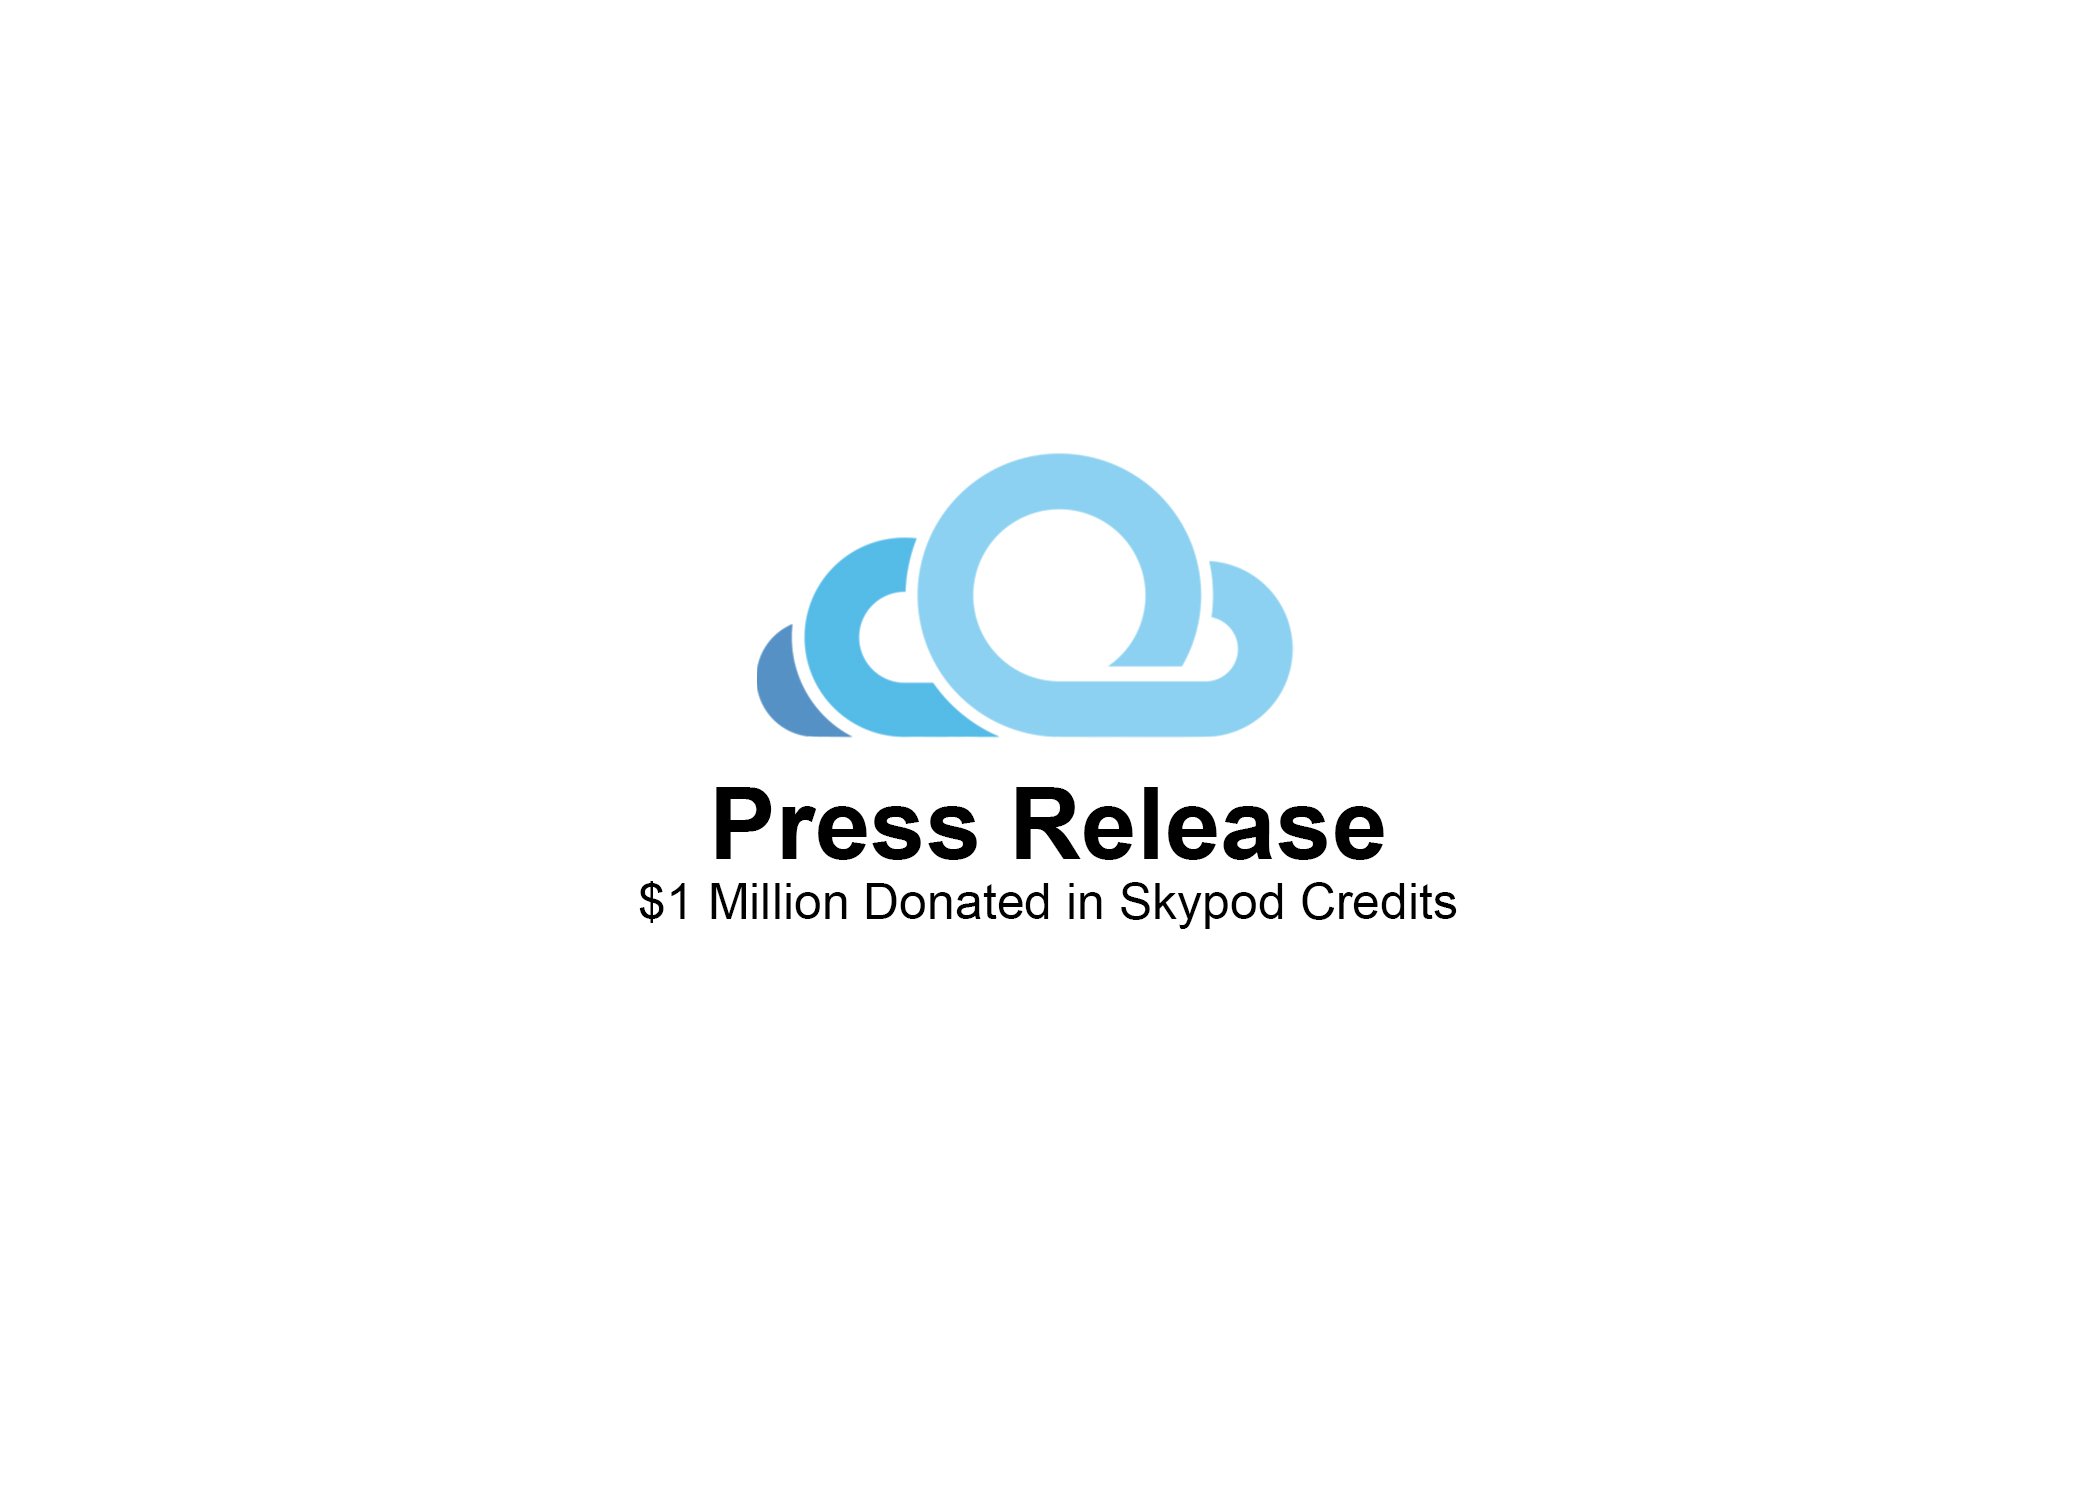 Skypod, a Digital Time Capsule Company, Donates $1 Million in Skypods to First Responders Amid Covid-19 Crisis